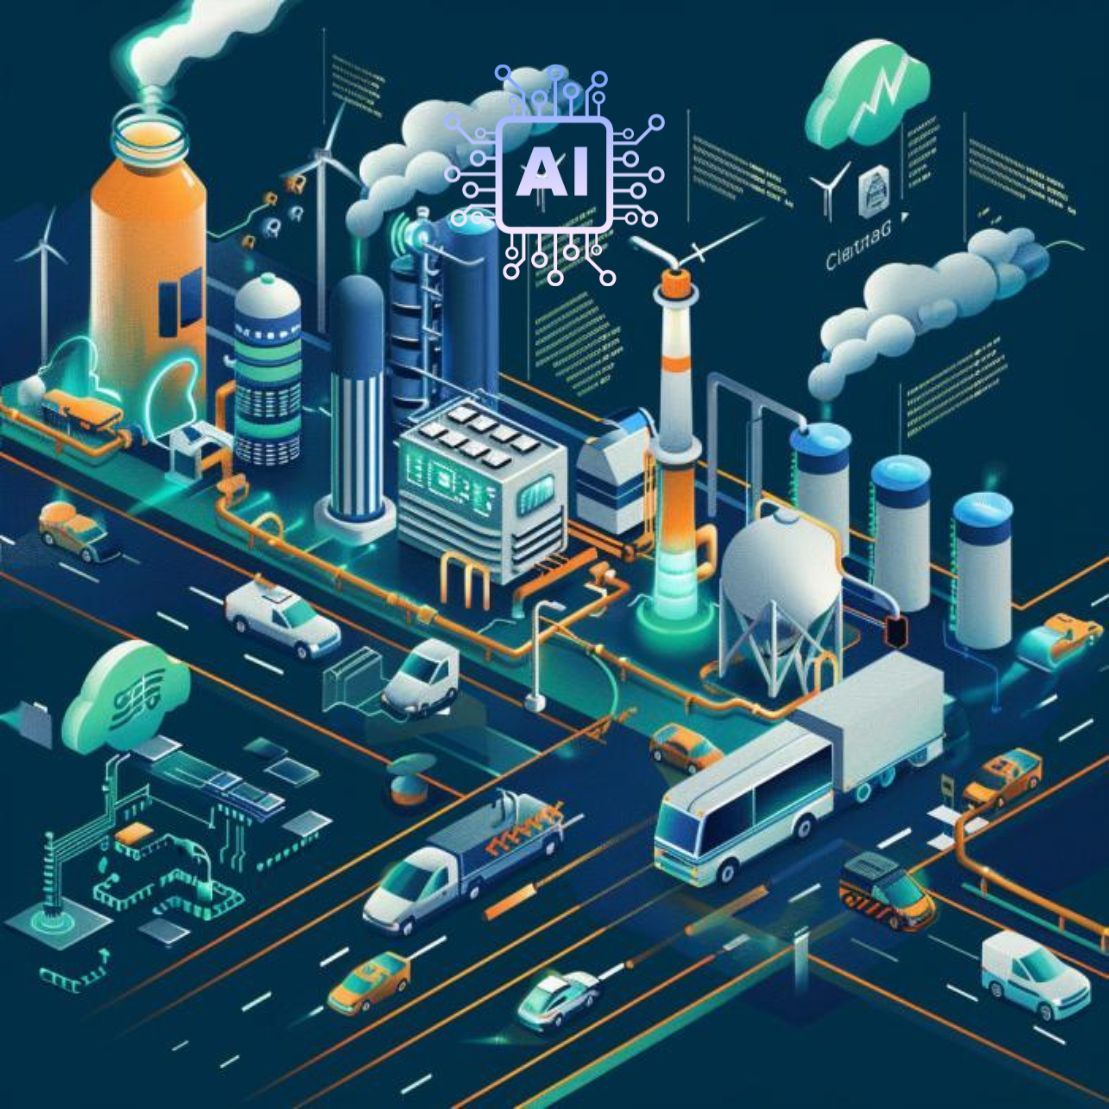 AI is revolutionizing air pollution control by enhancing monitoring through data analysis, identifying emission sources, managing traffic, predicting personal exposure, and designing sustainable solutions for a cleaner environment. #AIforCleanAir #SustainableSolutions